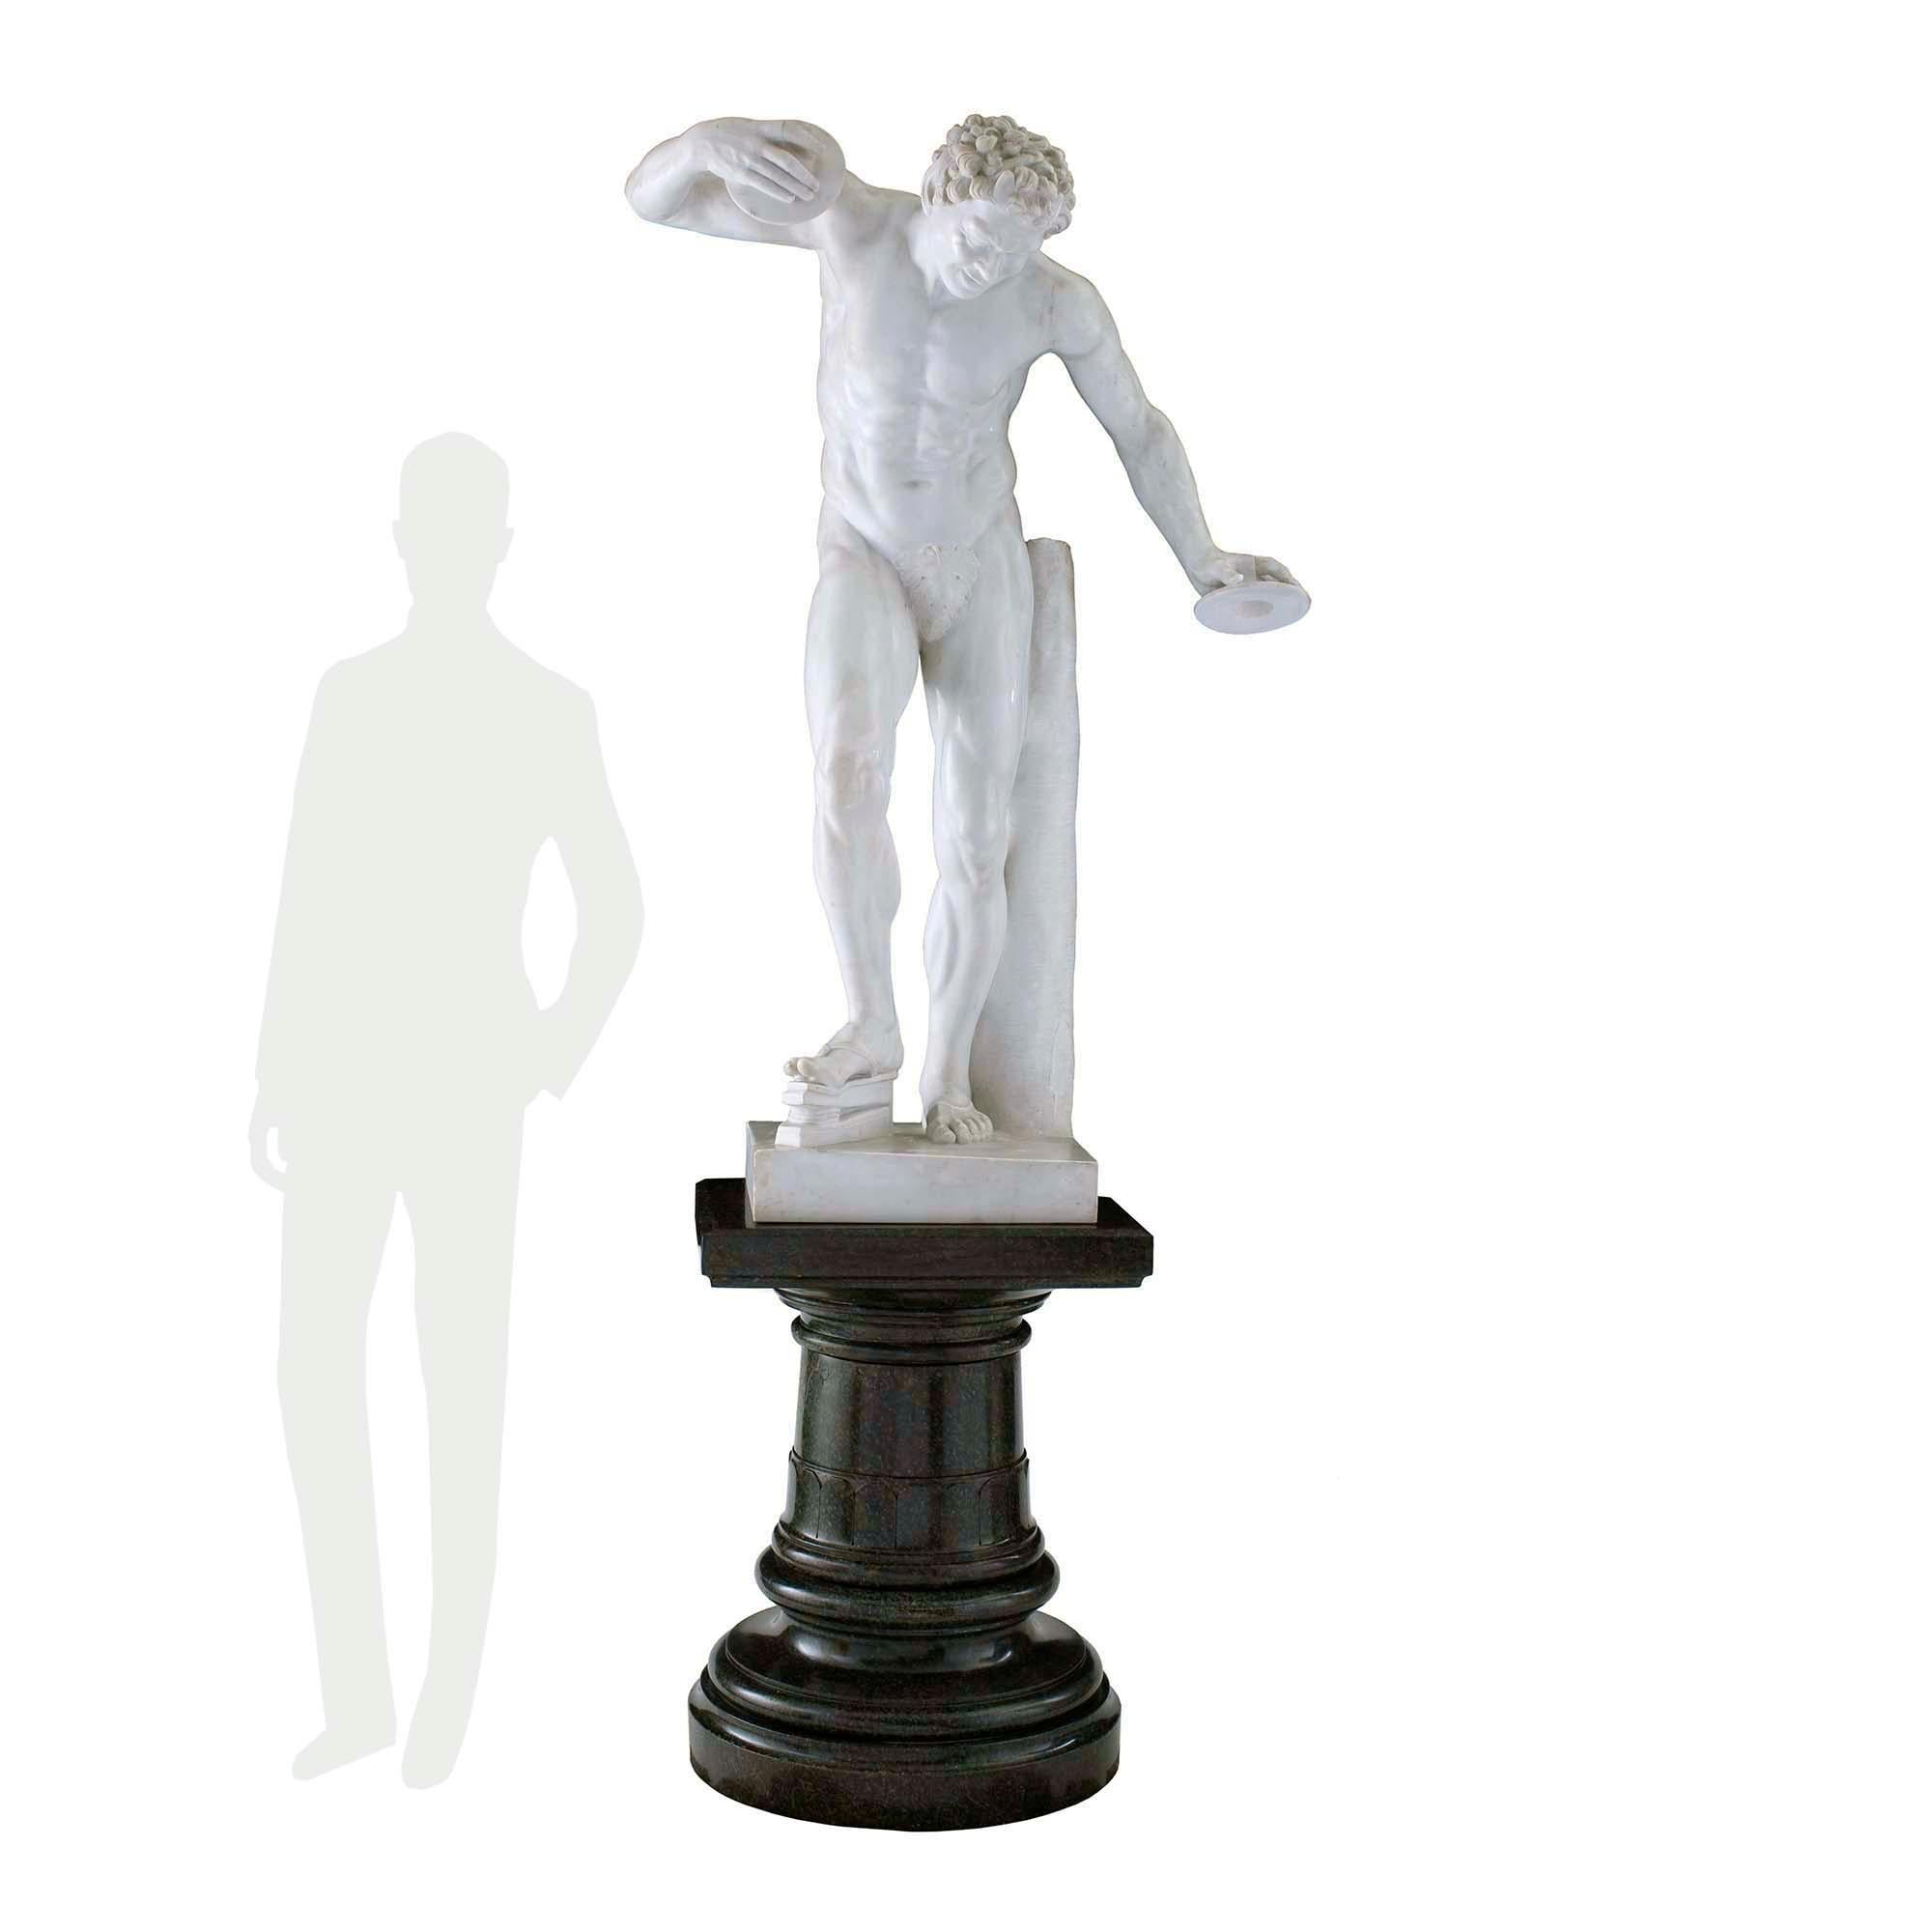 A sensational and large-scale Italian 19th century Neo-Classical st. white Carrara marble statue of a faun with cymbals signed Bazzanti, Firenze. The striking statue is raised by its original Vert Maurin marble pedestal with a mottled circular base,